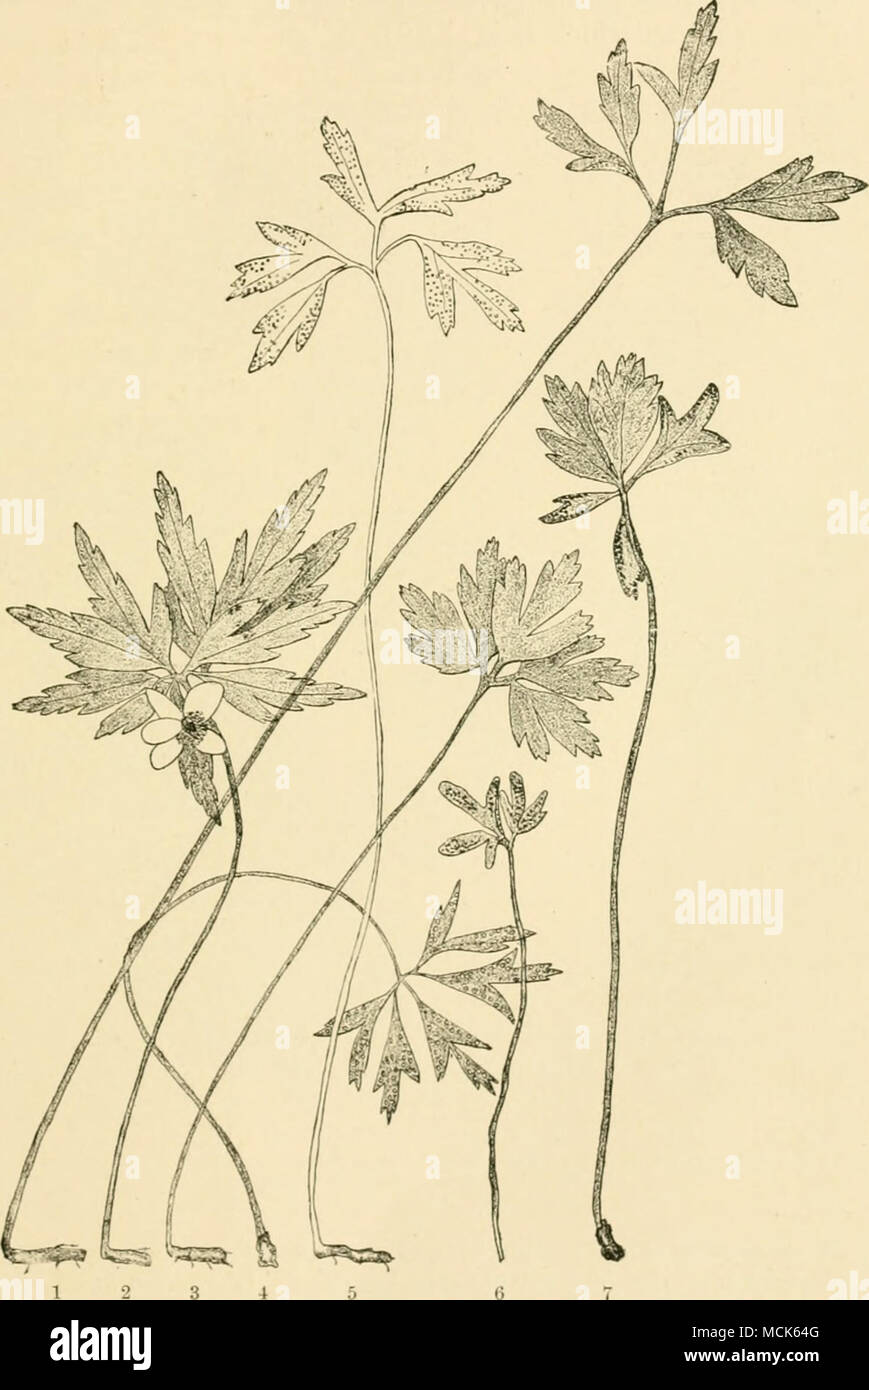 . Fio. IttO.—Ananone-RMt. 2 and 3, Normal plants of Anemone ranv.nculoides. 4, Aicidium pv.nclo.luiu on Anemone ranv.nculoides ; aecidia on the lower surface of the leaf; the plants are abnormally elongated, and the leaf-segments are smaller. 6 and 7, Puccinia fusca on Anemone nemorosa; the plants remiin small, 6 is completely deformed, 7 partially. 1 and 5, Aecidium leucospermum on Ammone ncmorom ; the plants are abnormally elongated and the leaf-segments smaller, (v. Tubeuf del.) Stock Photo